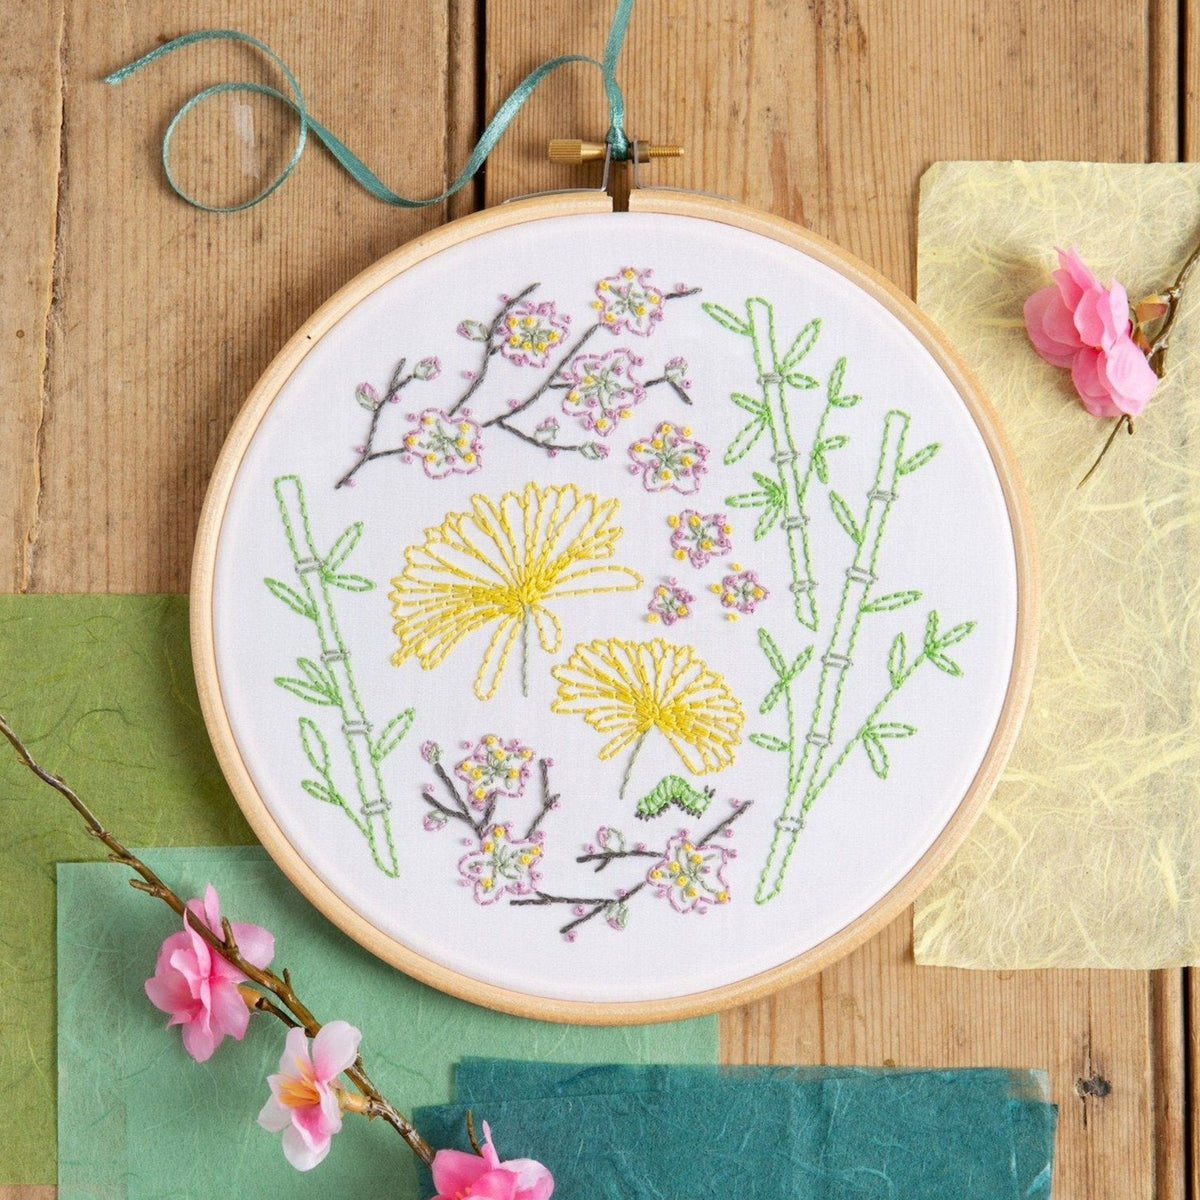 Embroidery Kit, Beginner Christmas Embroidery Pattern, Winter Embroidery Kit,  Easy embroidery kit, Botanical embroidery kit, DIY craft kit — I Heart Stitch  Art: Beginner Embroidery Kits + Patterns